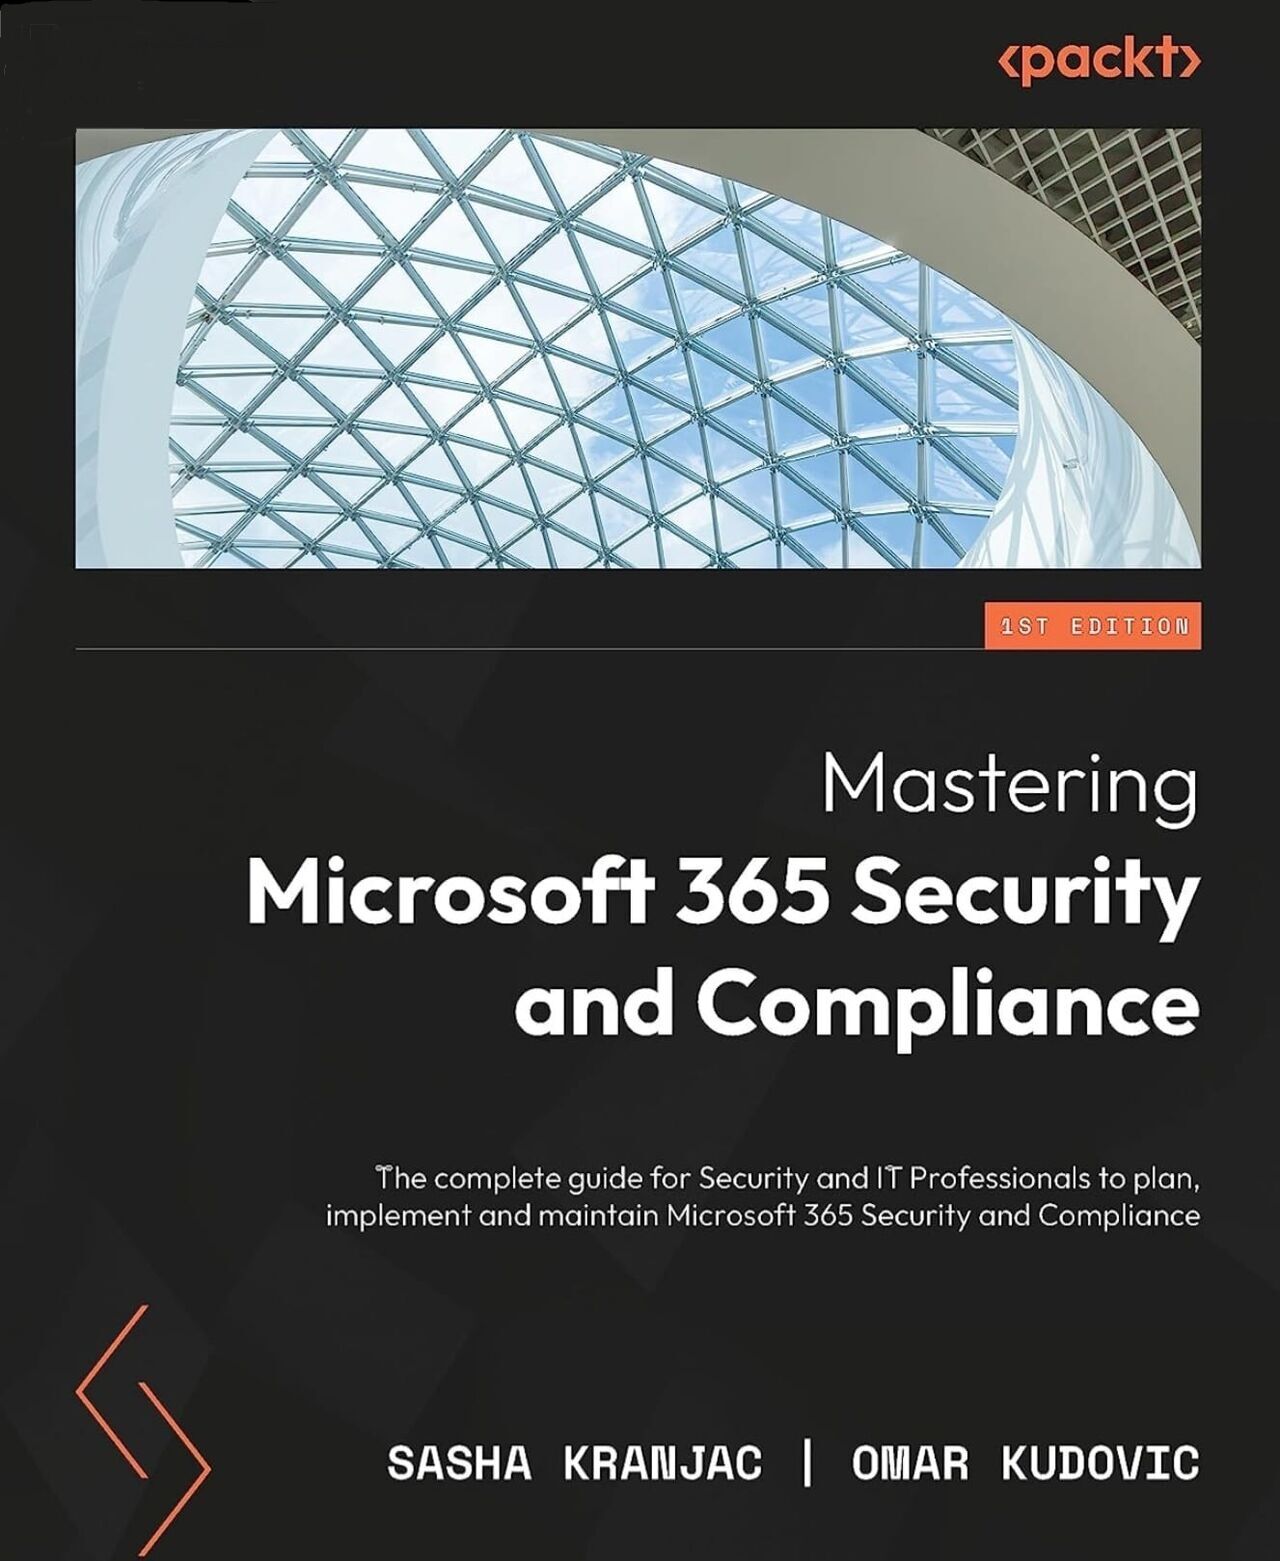 You are currently viewing A new book: Mastering Microsoft 365 Security and Compliance